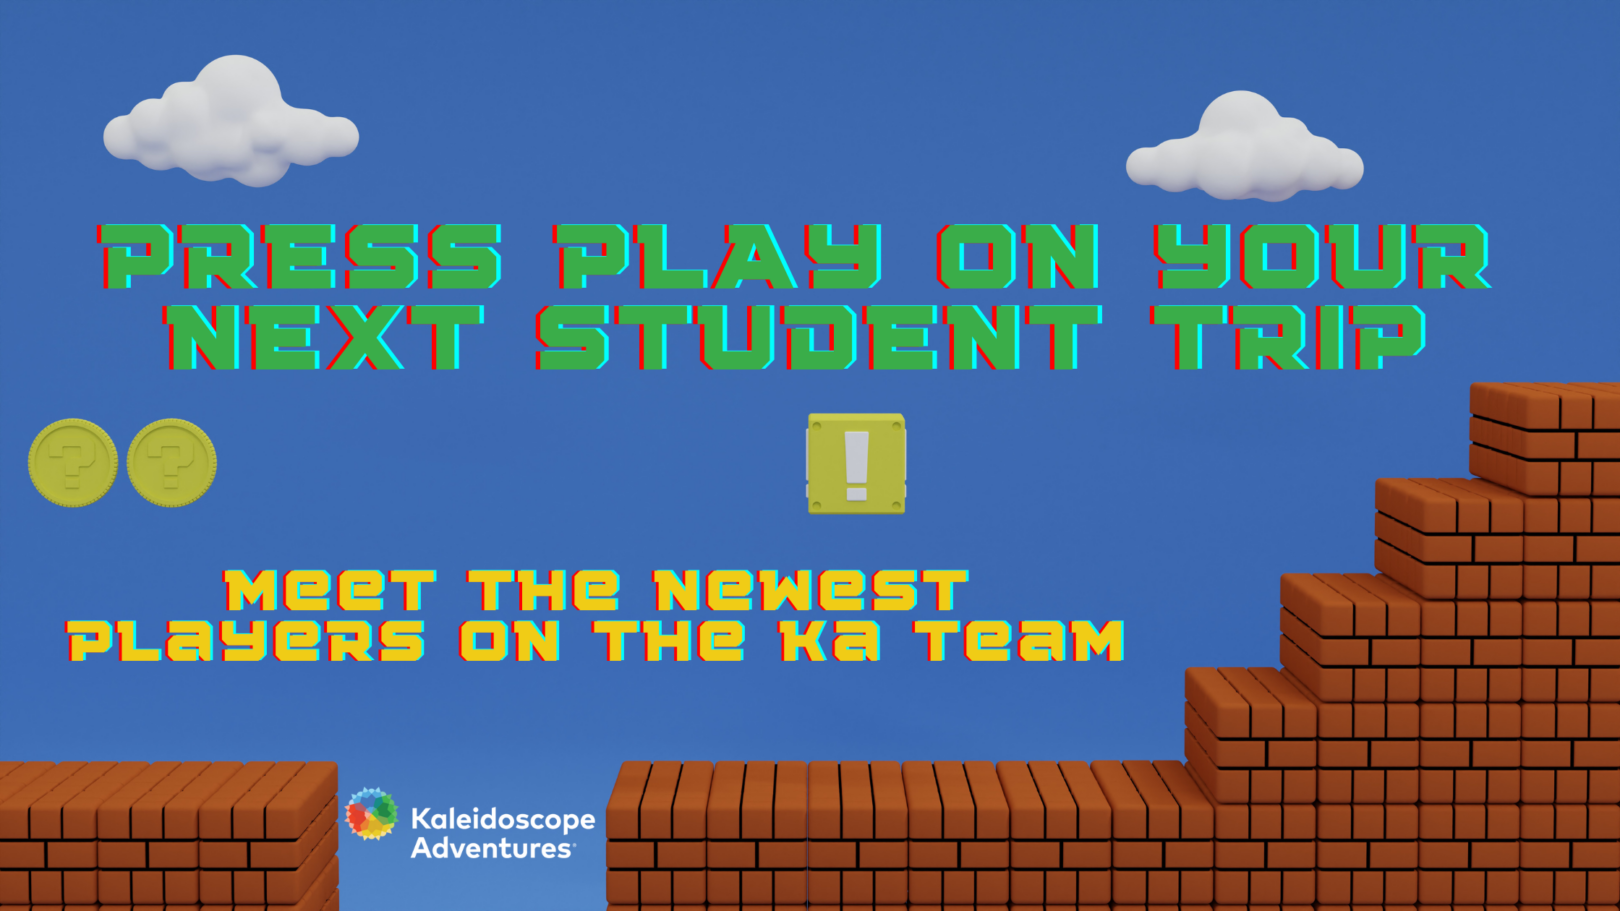 If you're ready to press play on your next student trip, we have new players to help!  